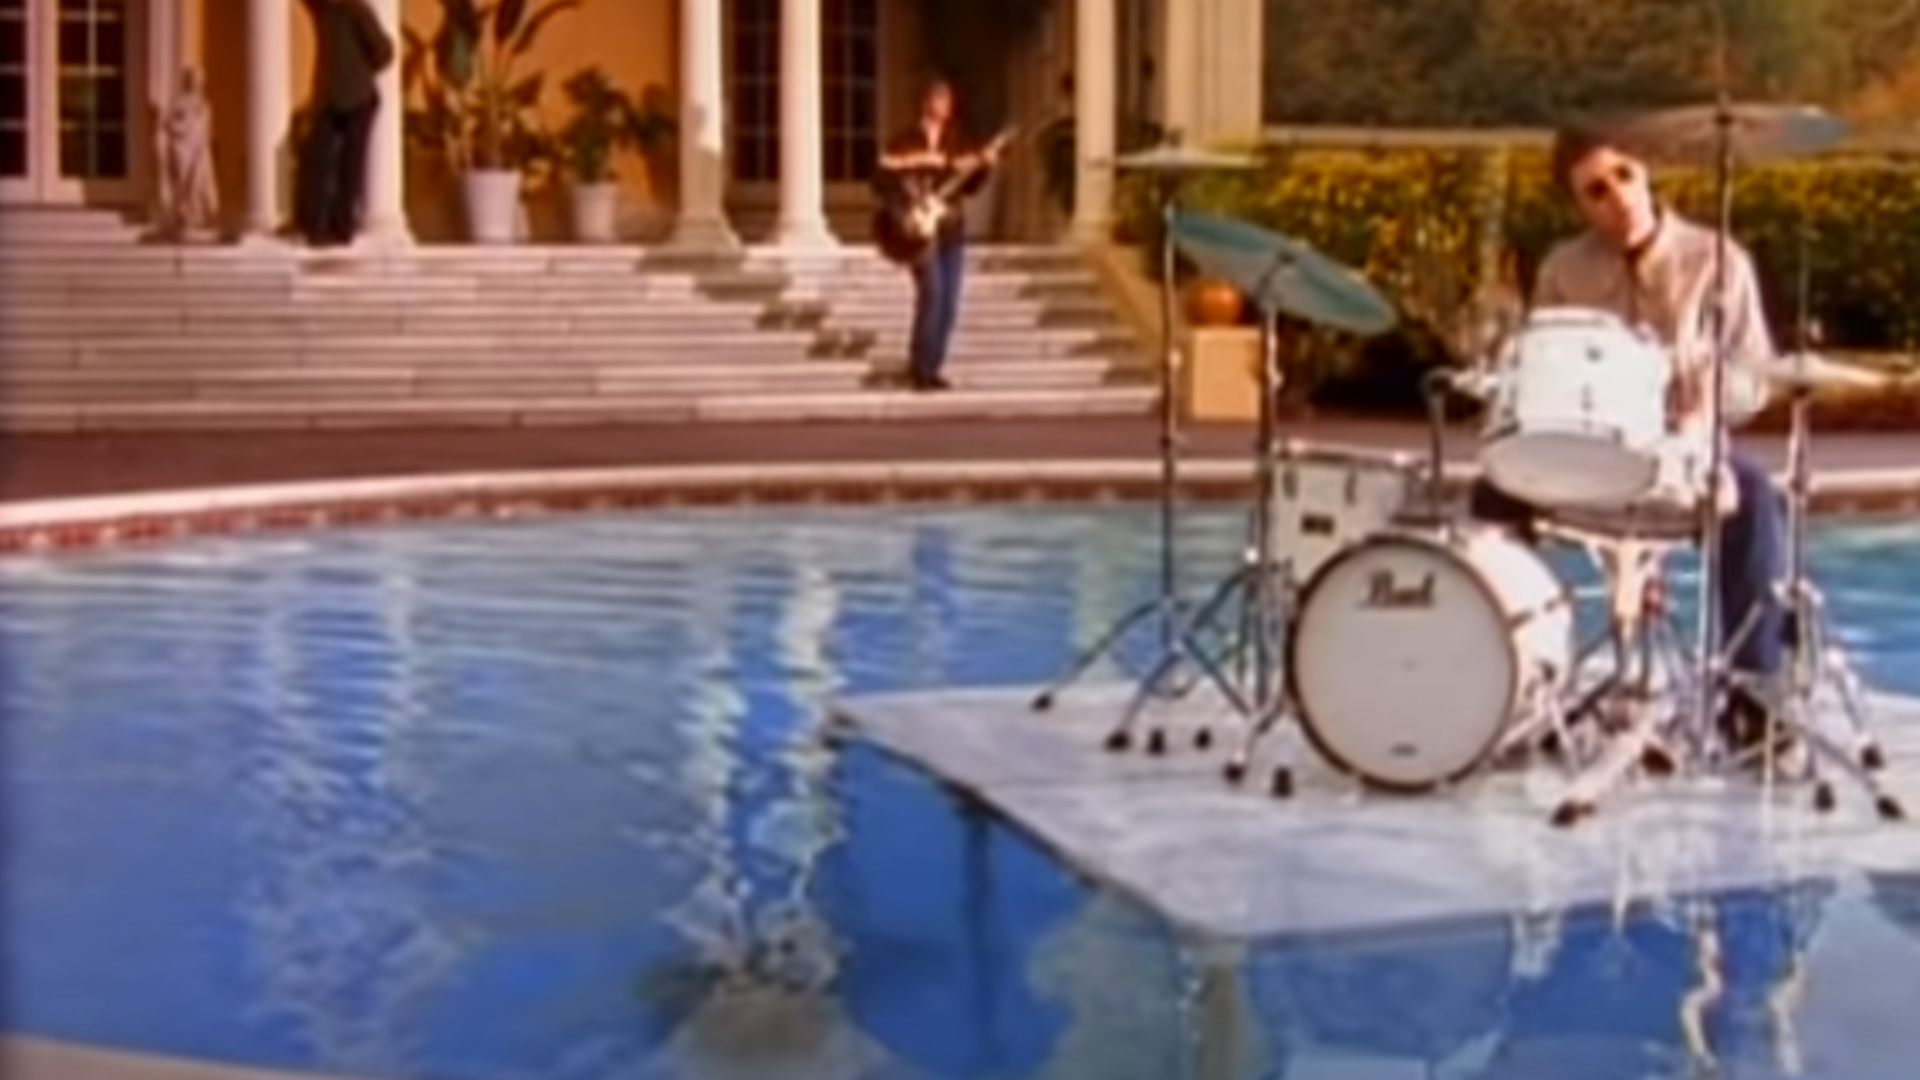 Oasis' drummer playing drums in a pool